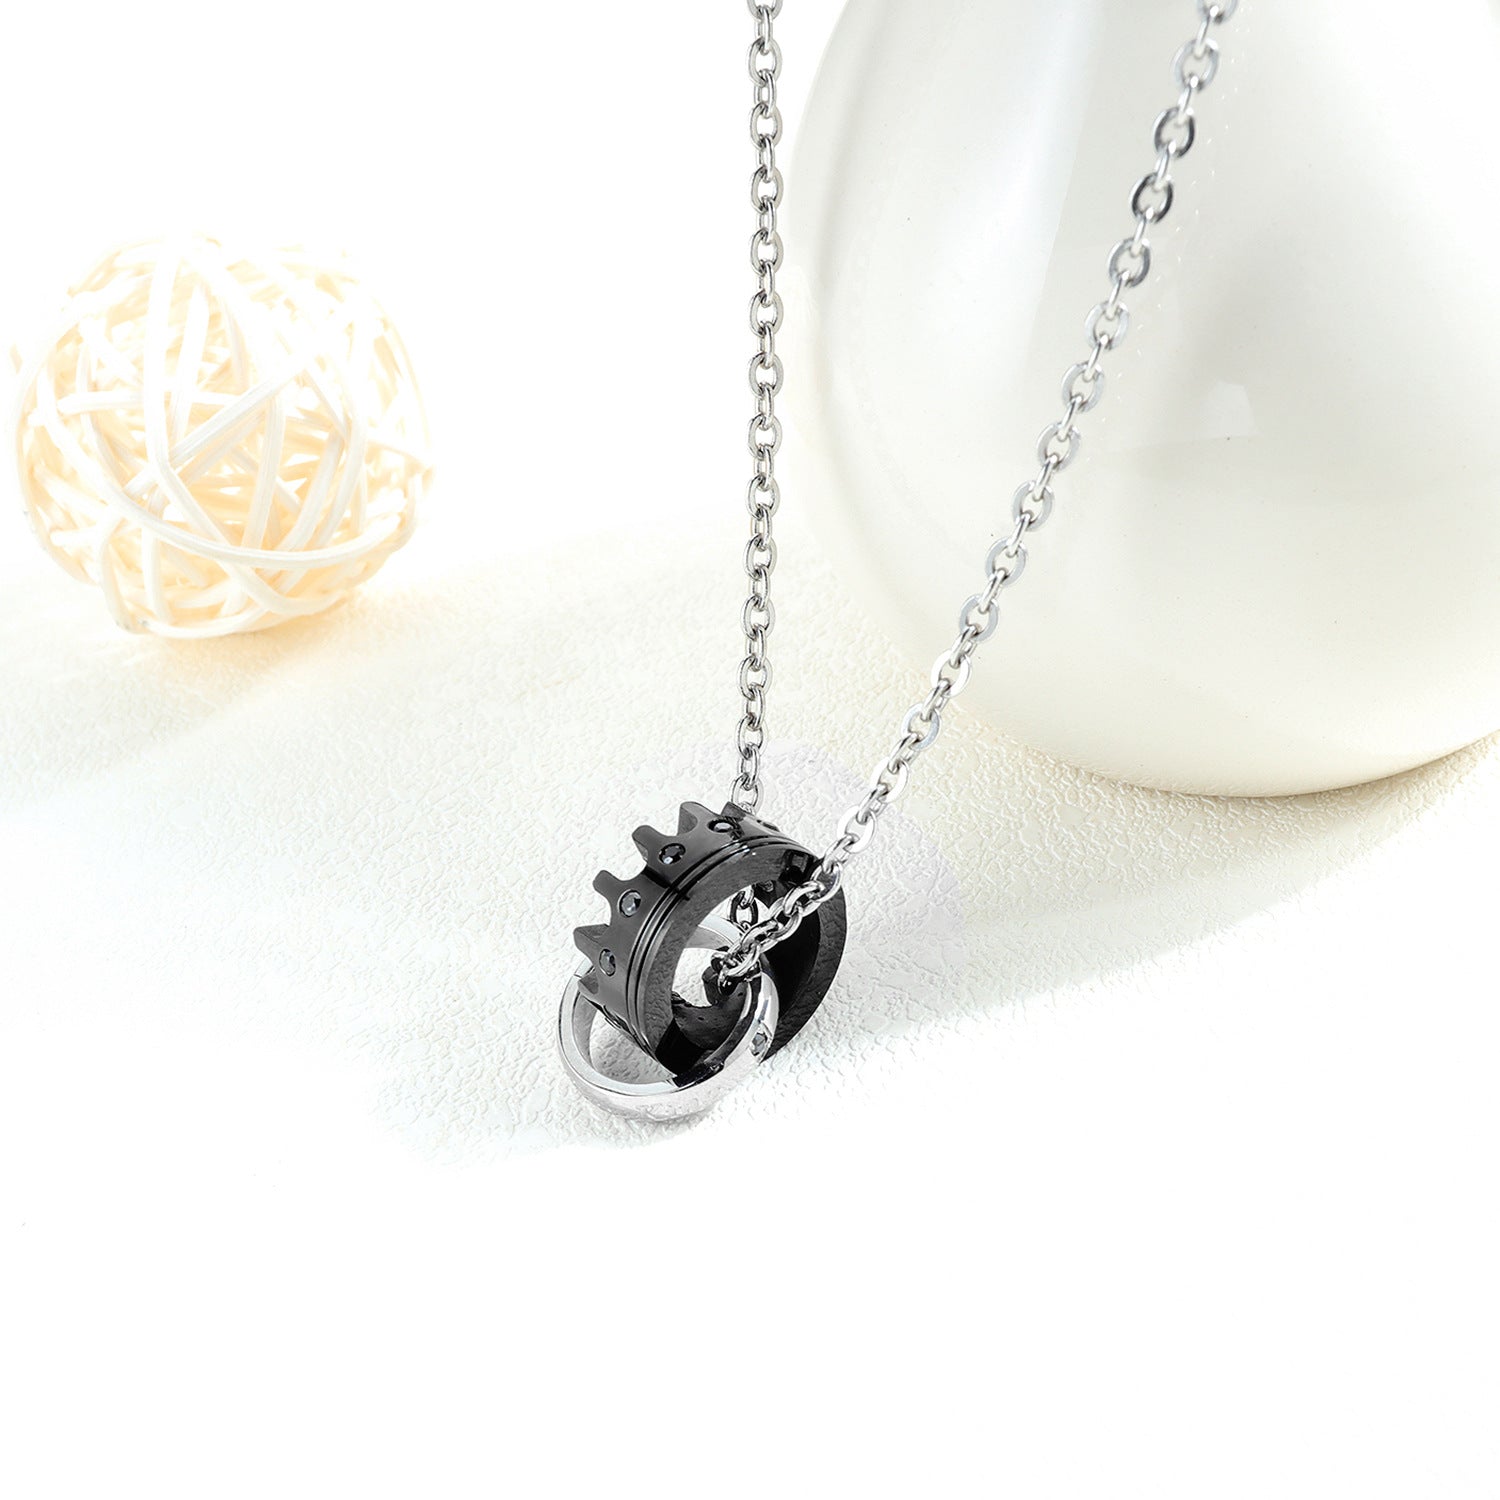 His Queen Her King Titanium Couples Valentine's Day Gift Necklace With Diamond Crown Pendant Tanabata Necklace - LiveLaughlove